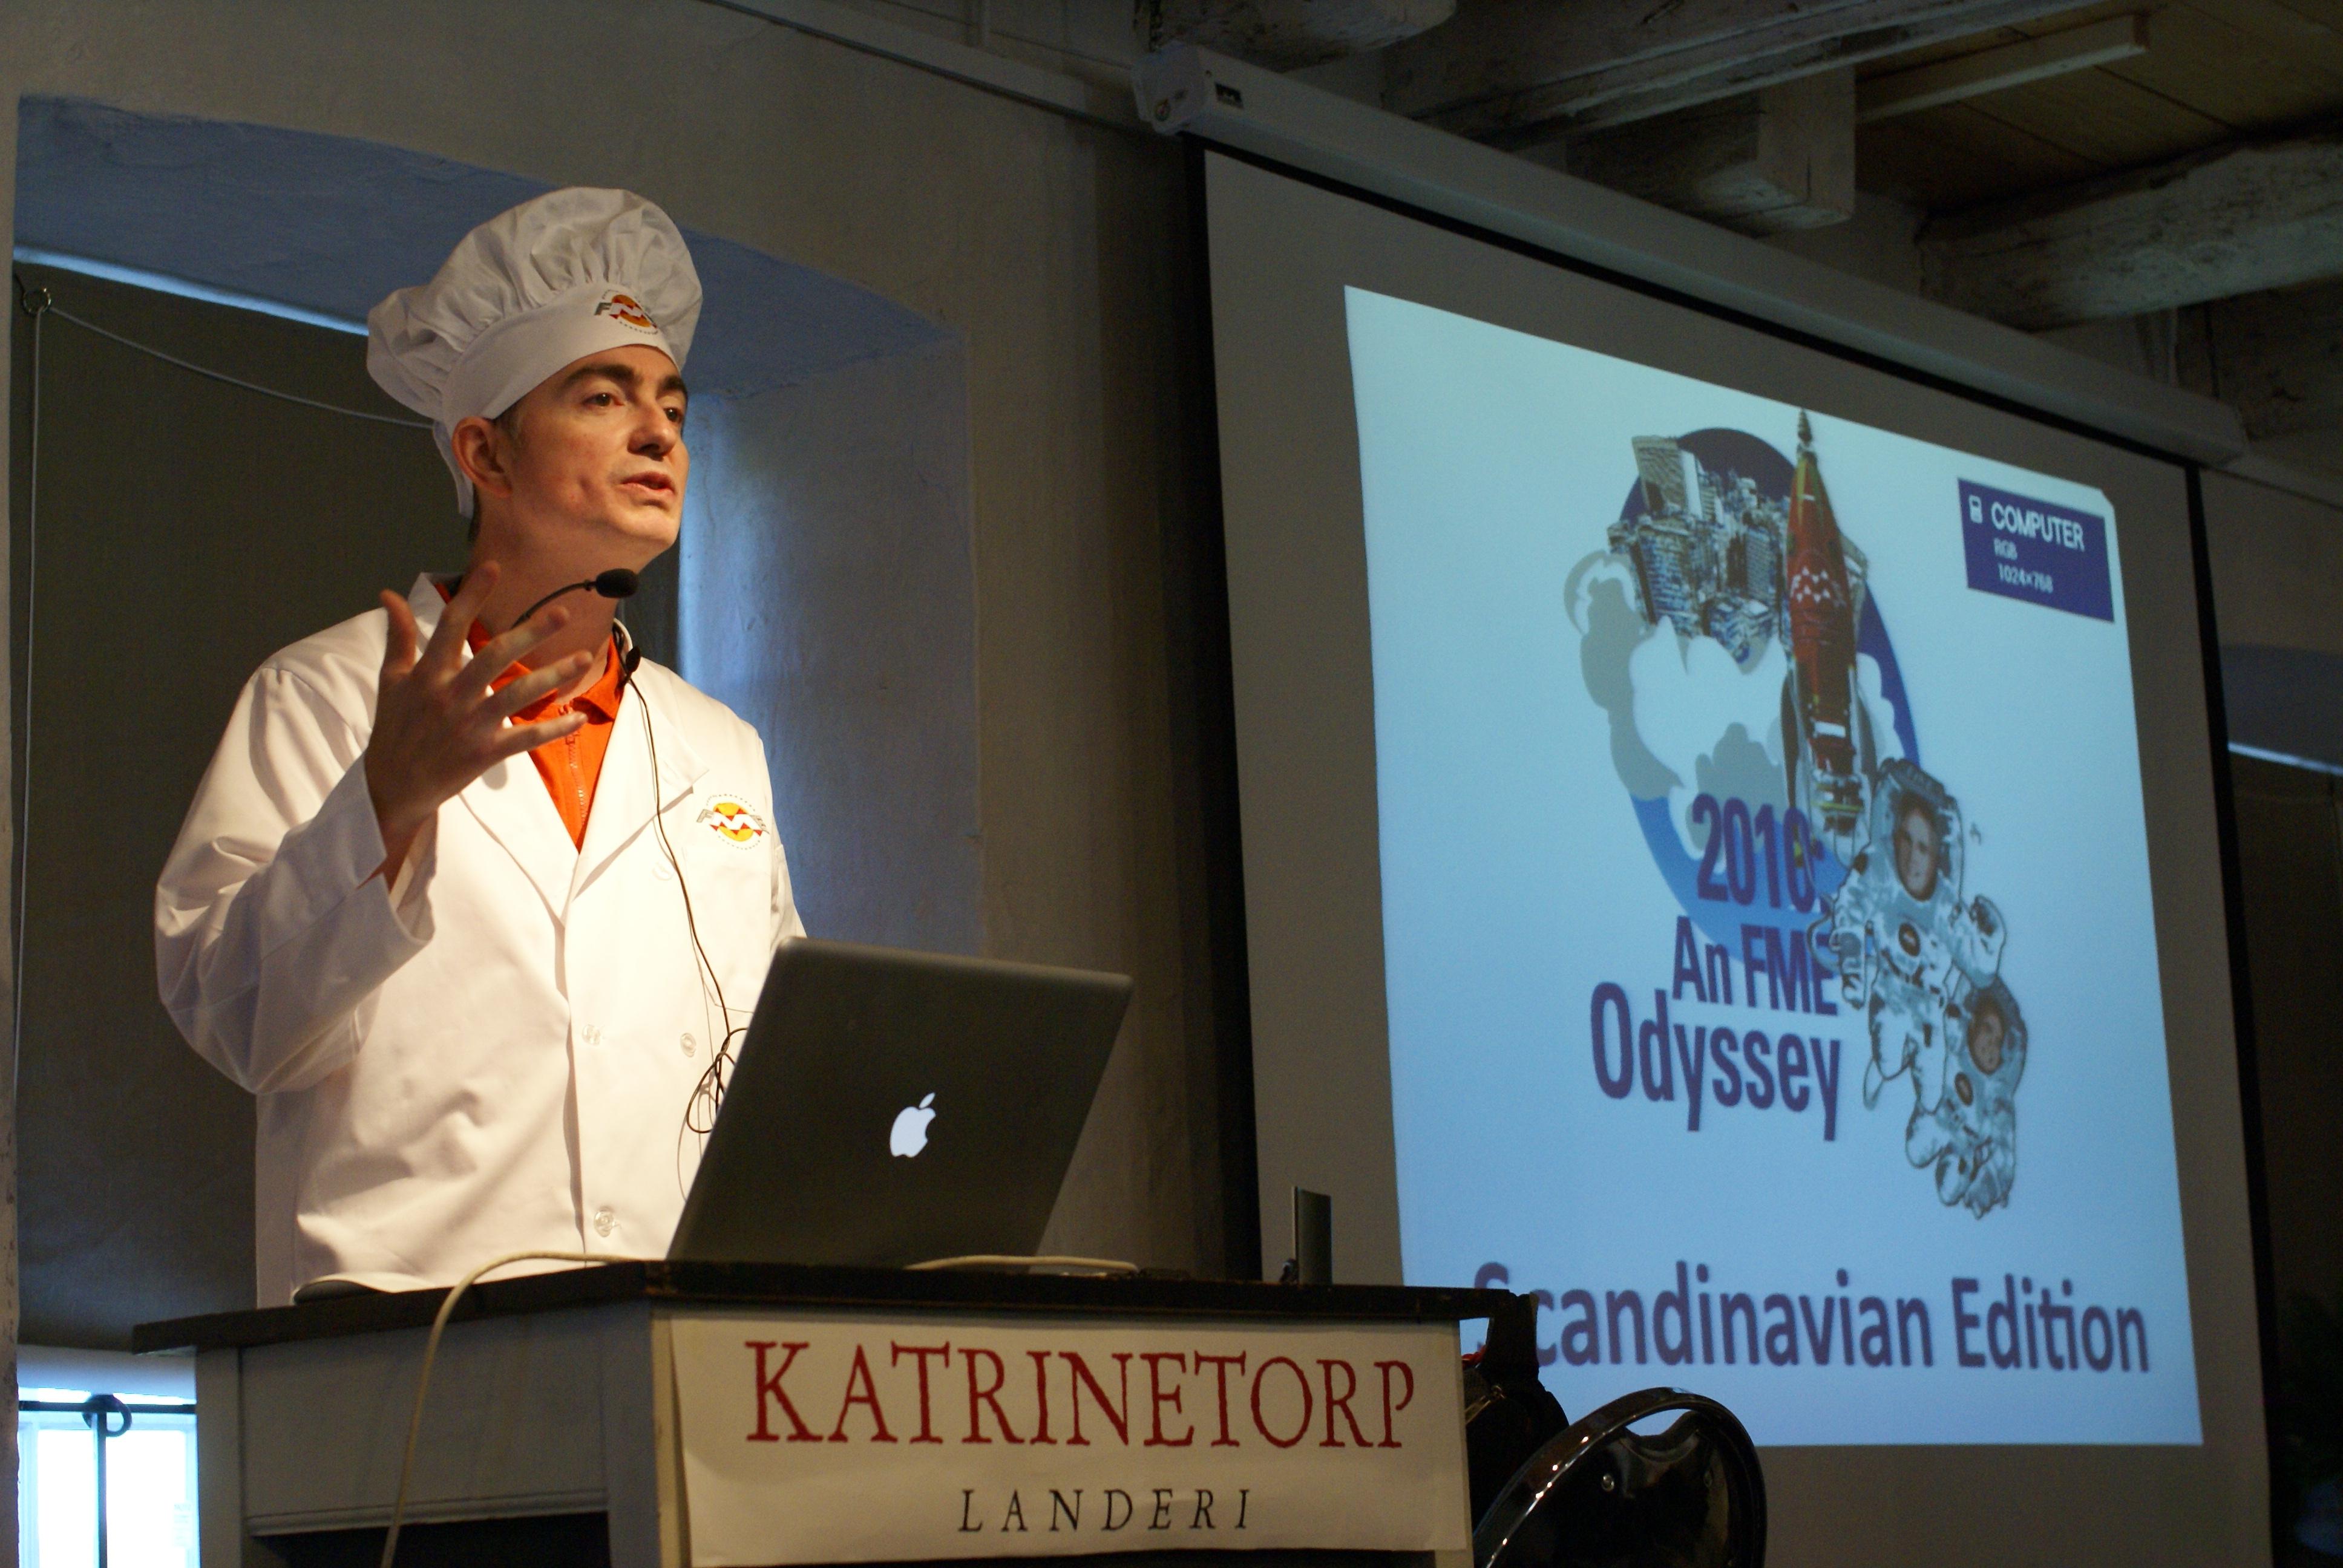 Dale at the FME Scandinavian User Conference